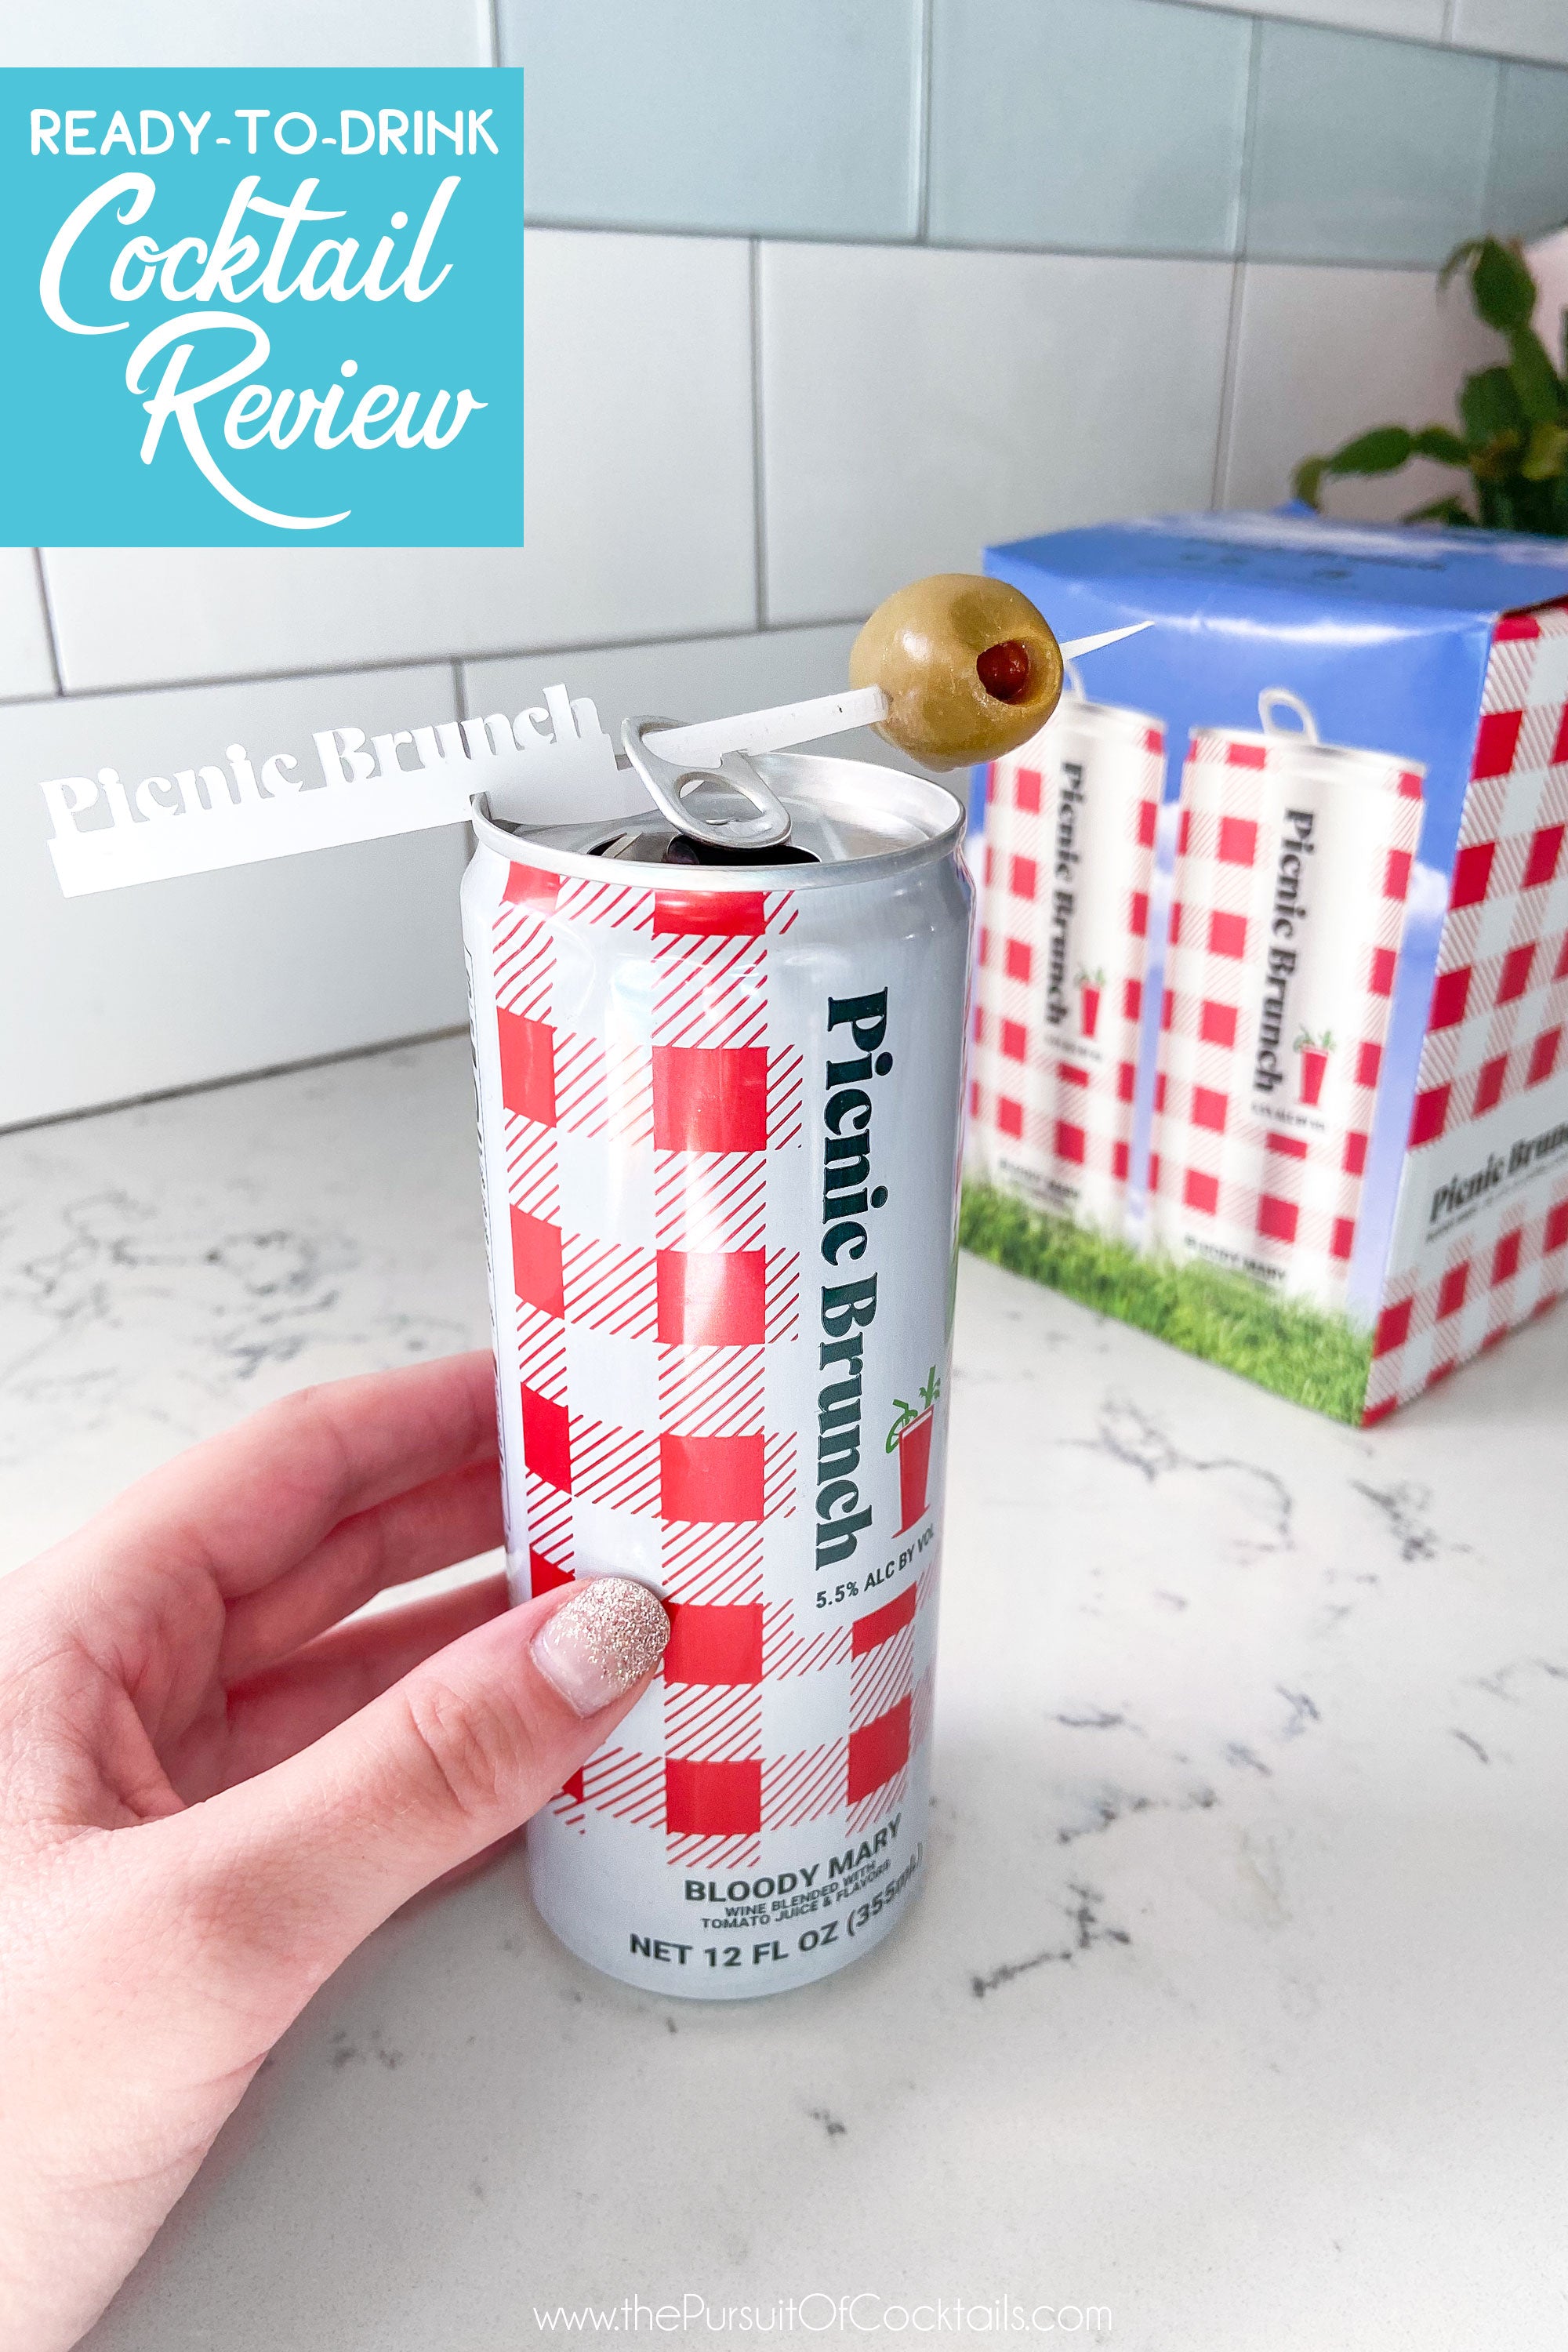 Picnic Brunch Bloody Mary canned cocktail review by The Pursuit of Cocktails